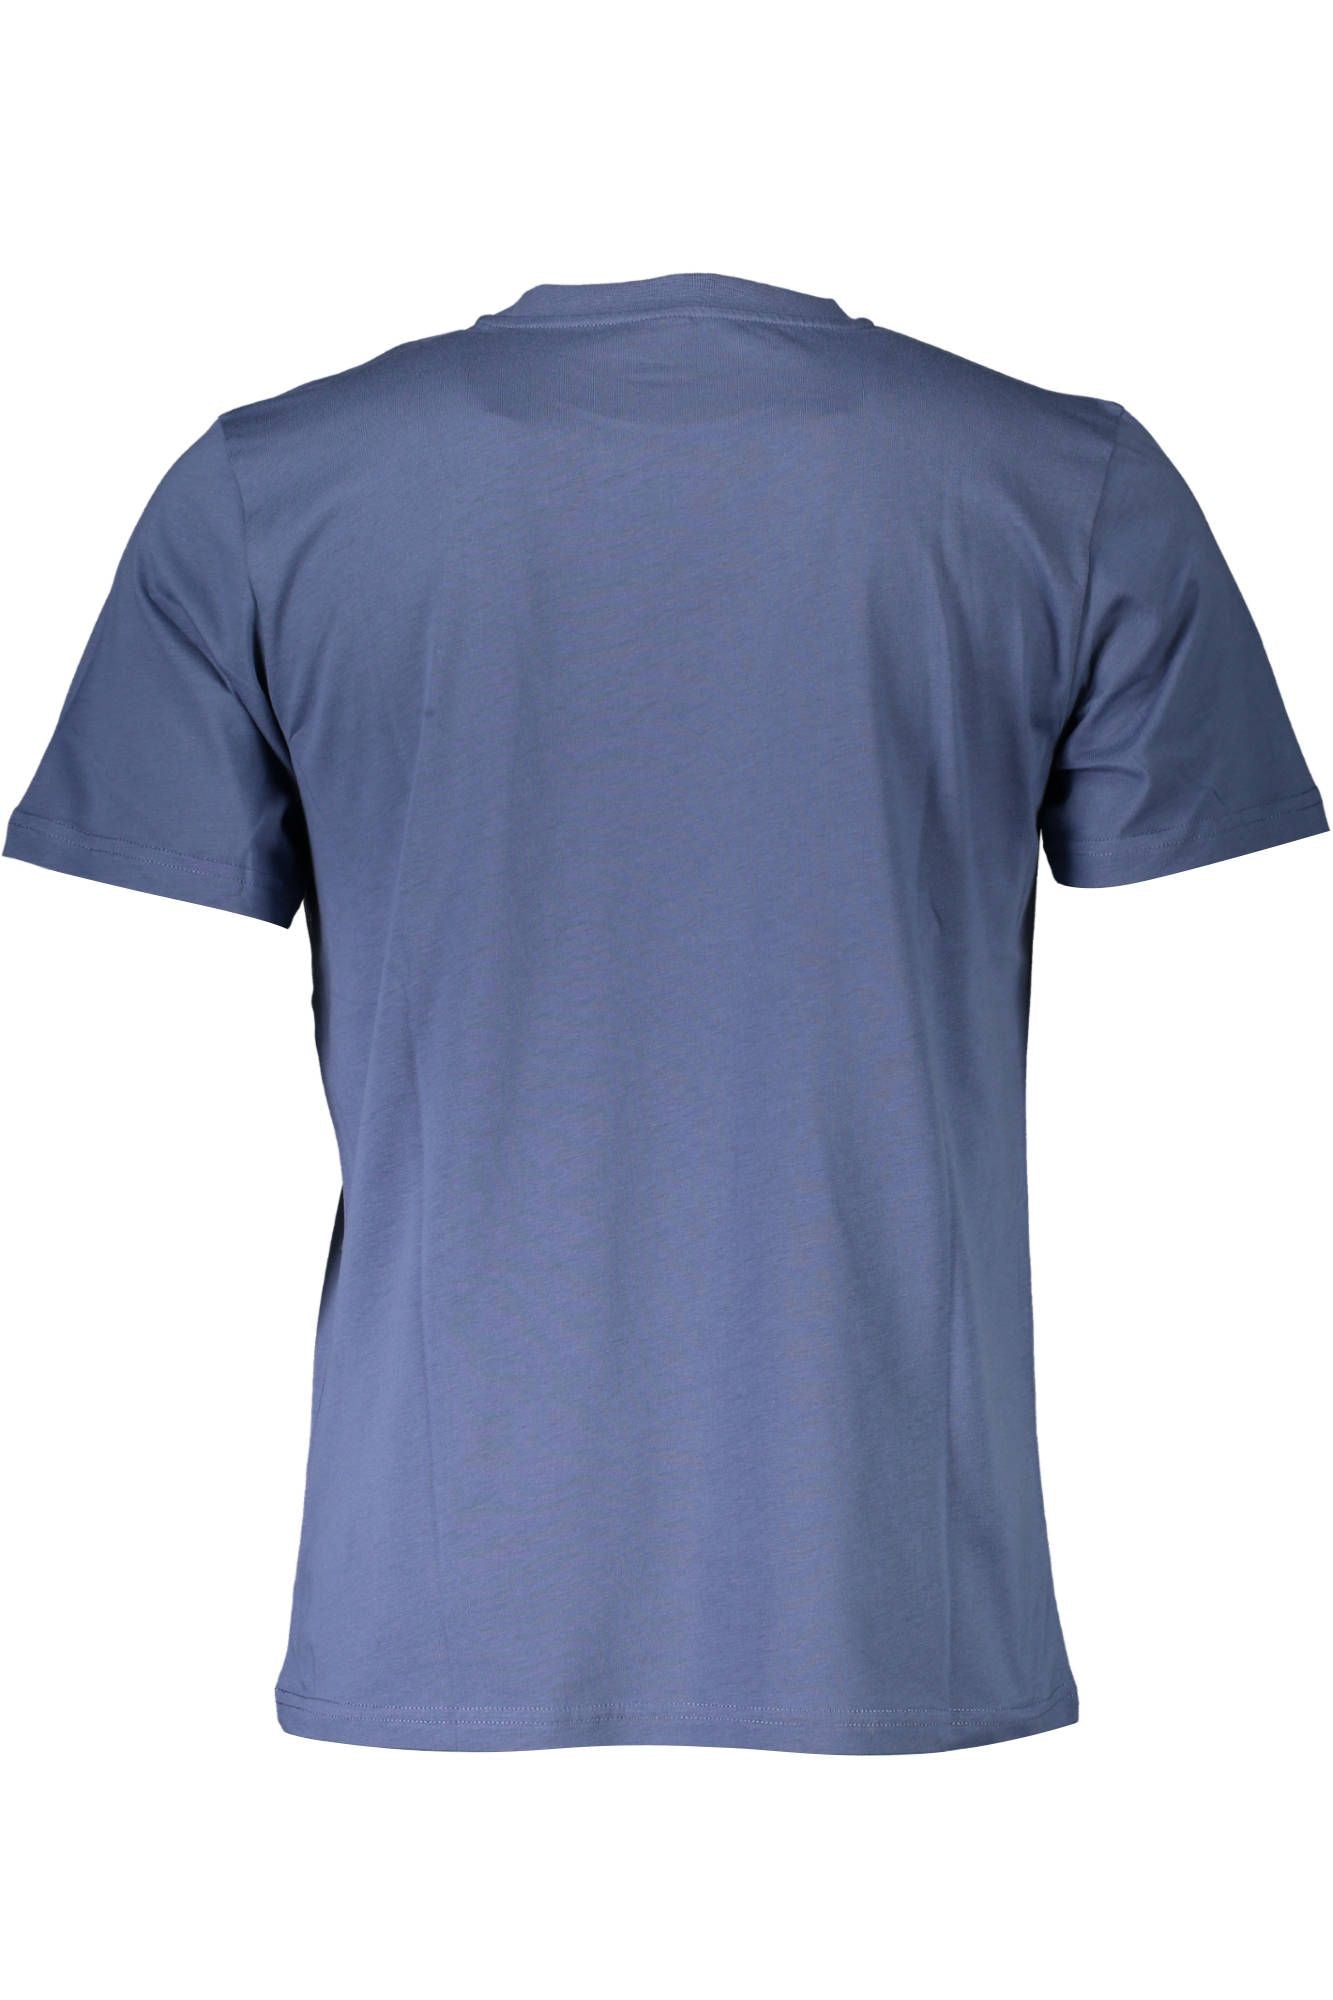 North Sails Blue Cotton Crew Neck Tee with Print